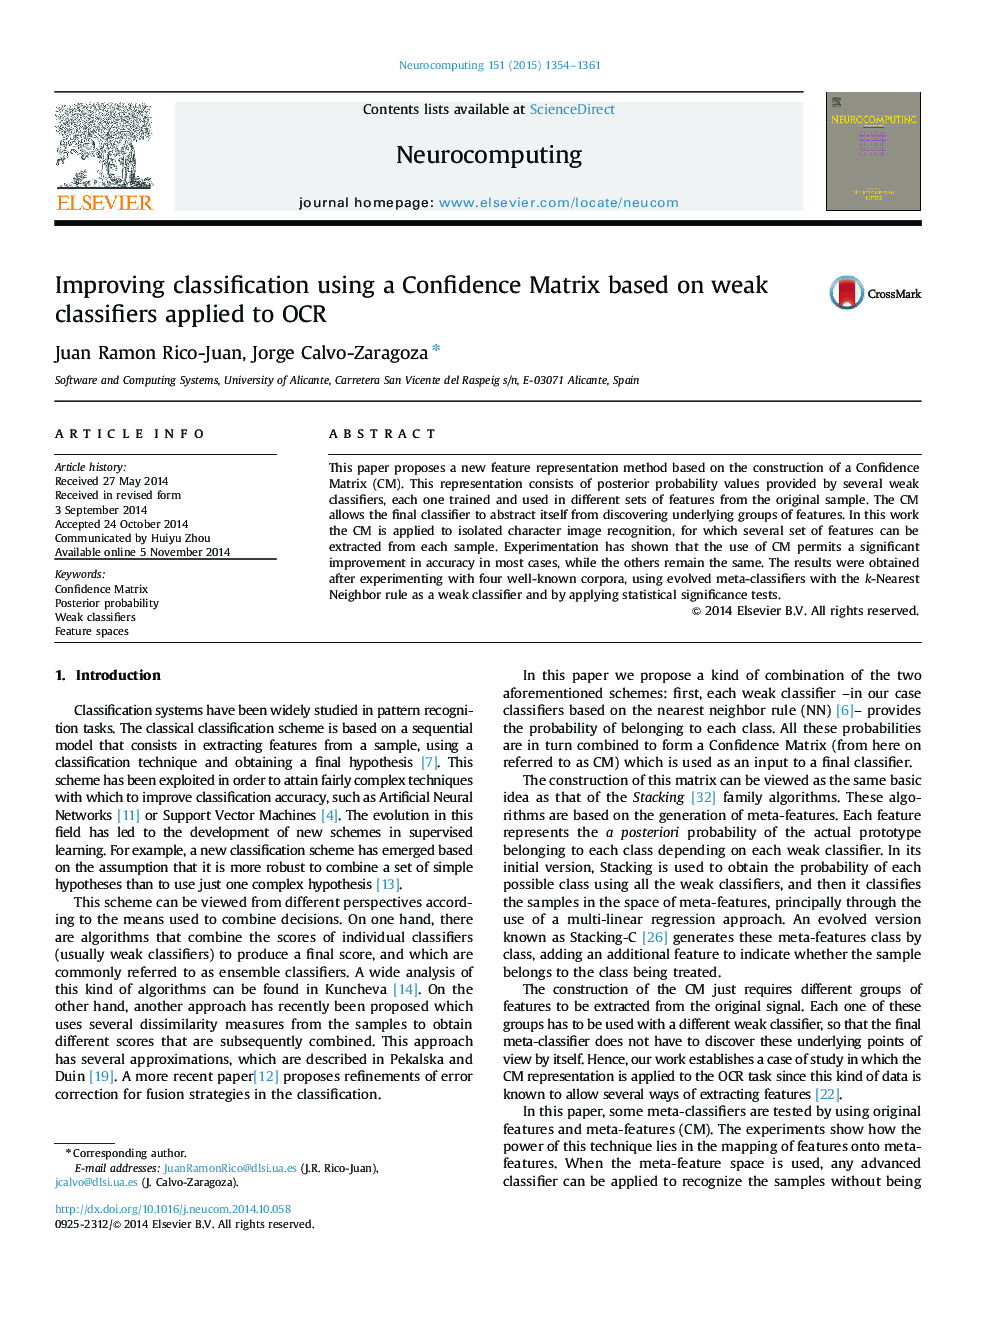 Improving classification using a Confidence Matrix based on weak classifiers applied to OCR